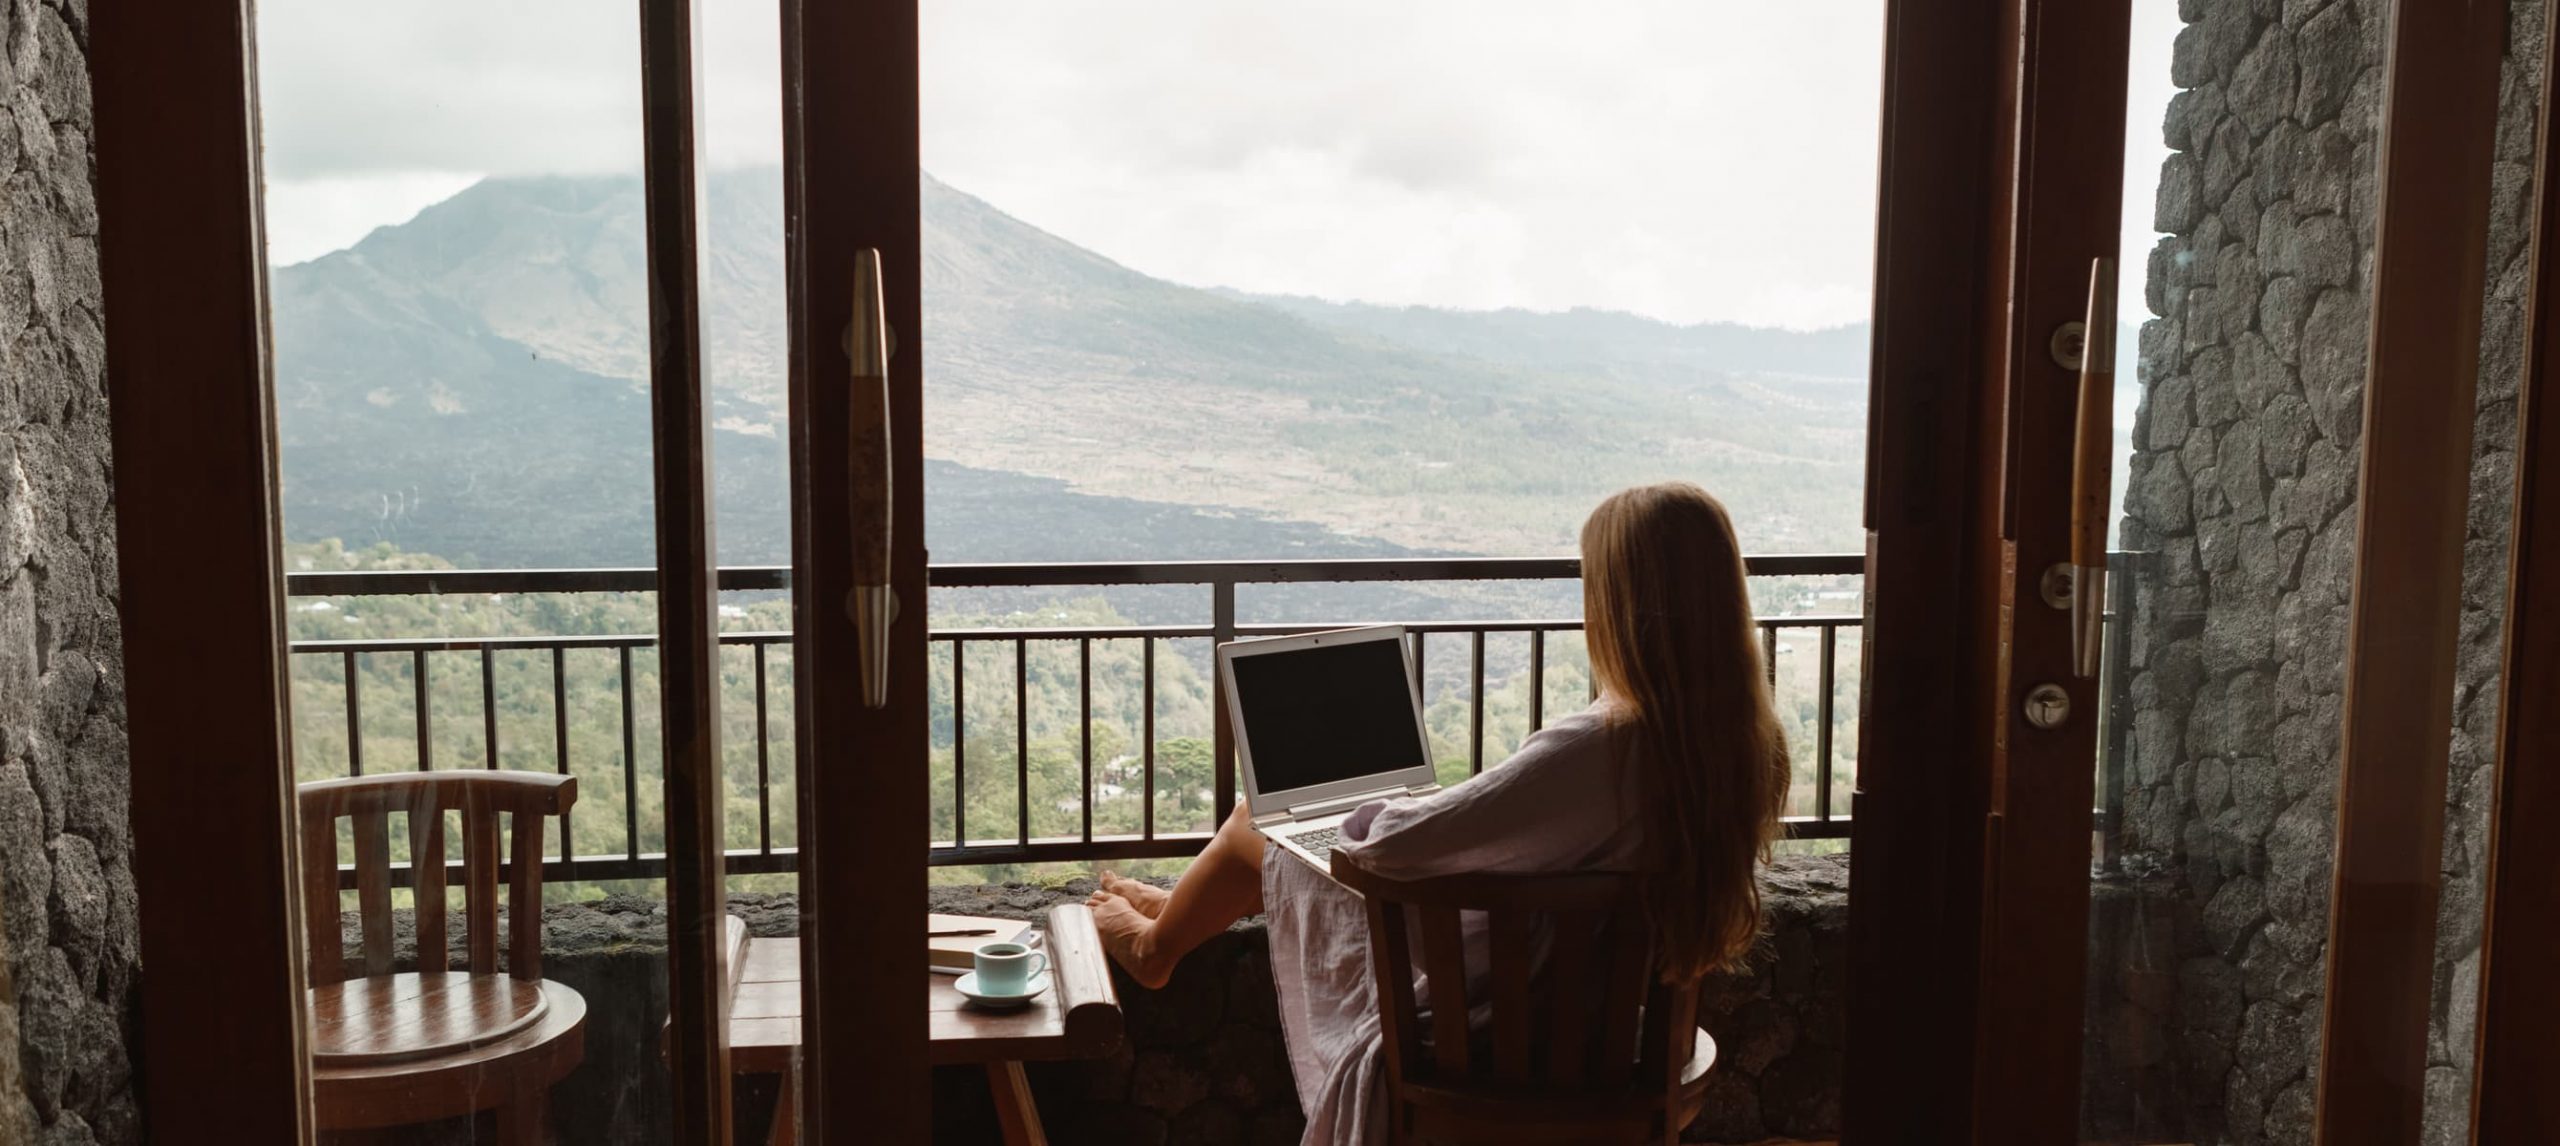 Remote girl working on her laptop on a hotel deck overlooking mountains.